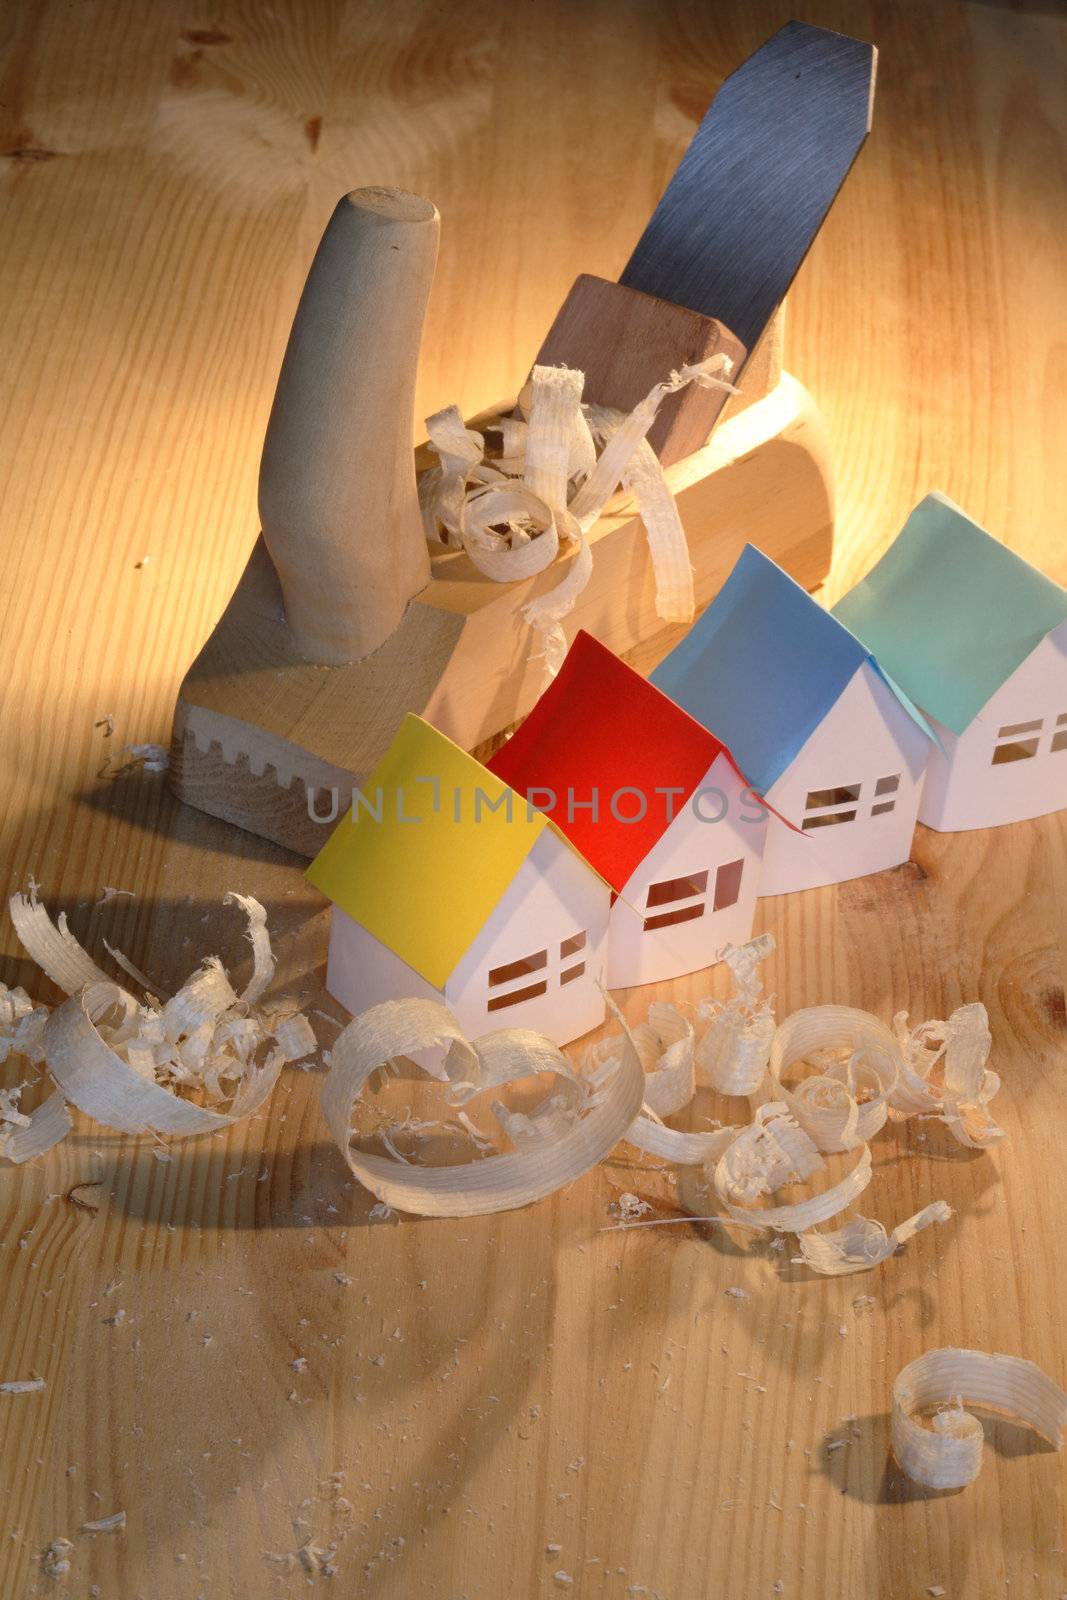 Few small paper houses near wood planer on wooden background